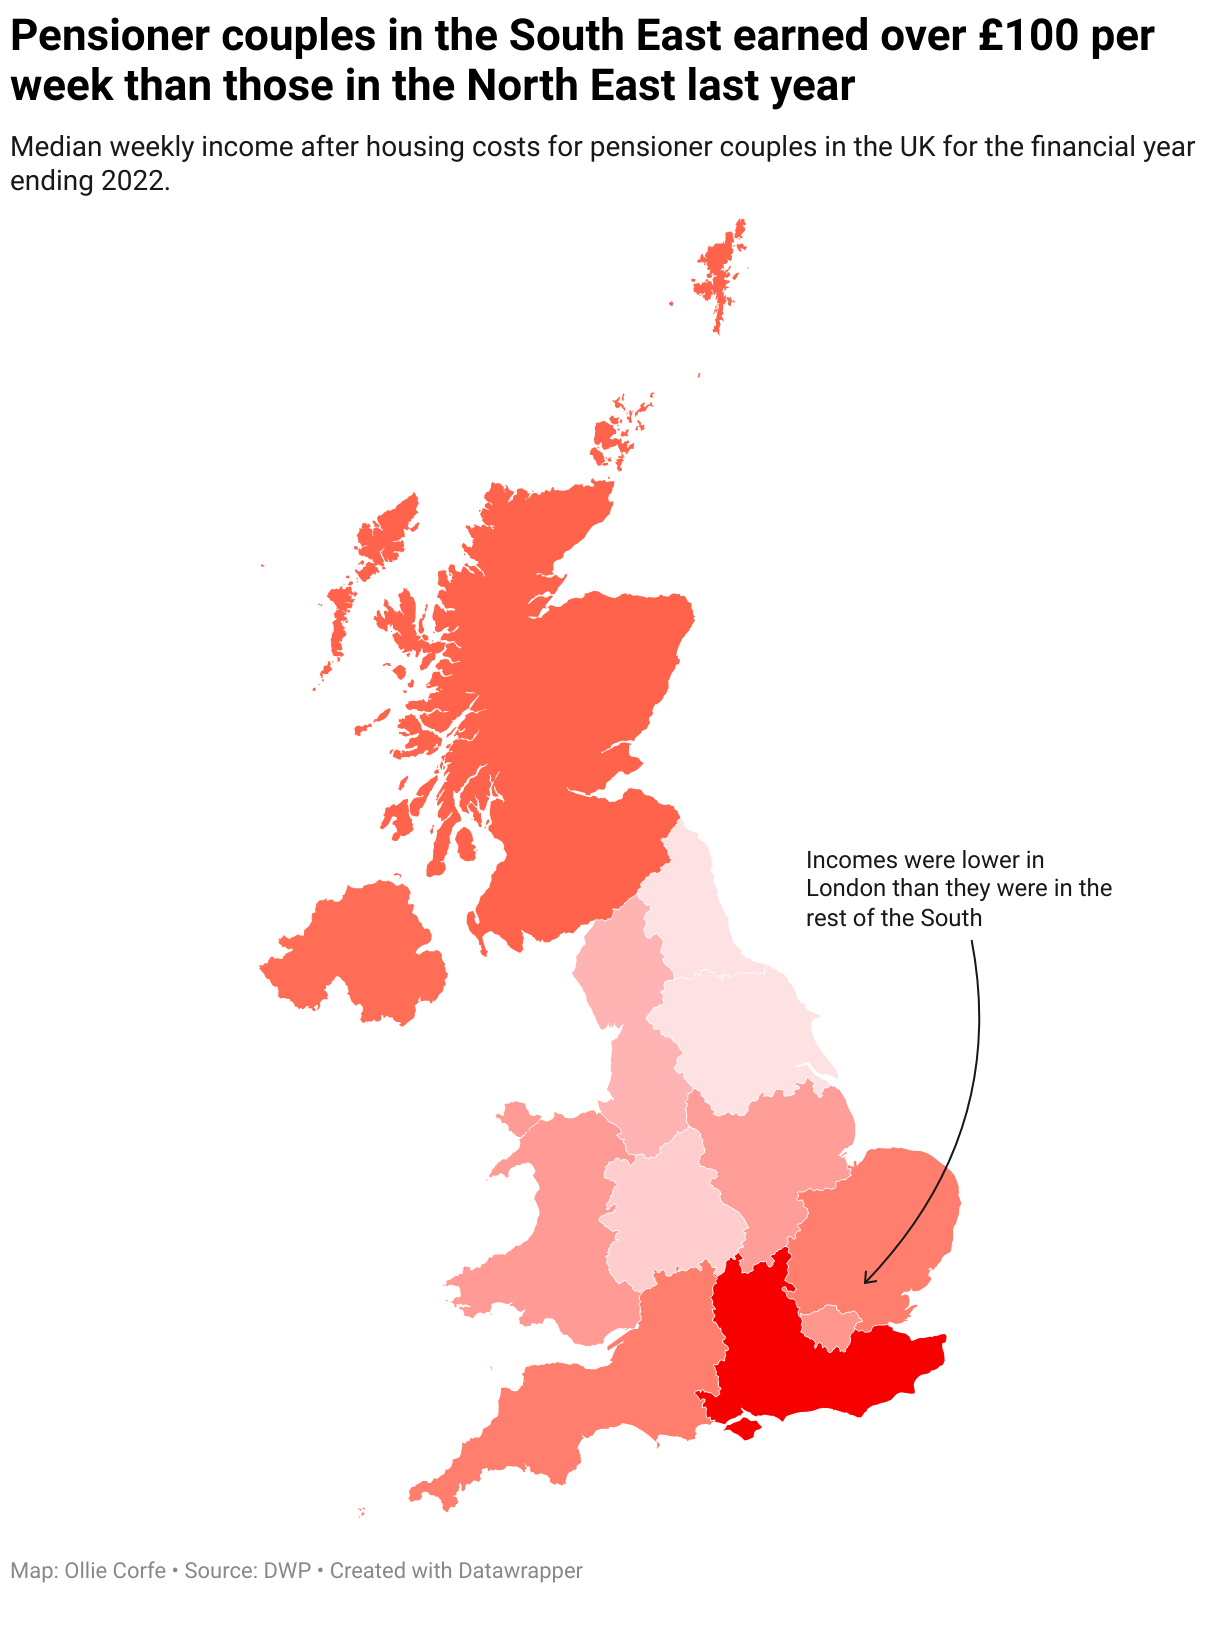 Map of weekly UK pensioner incomes.